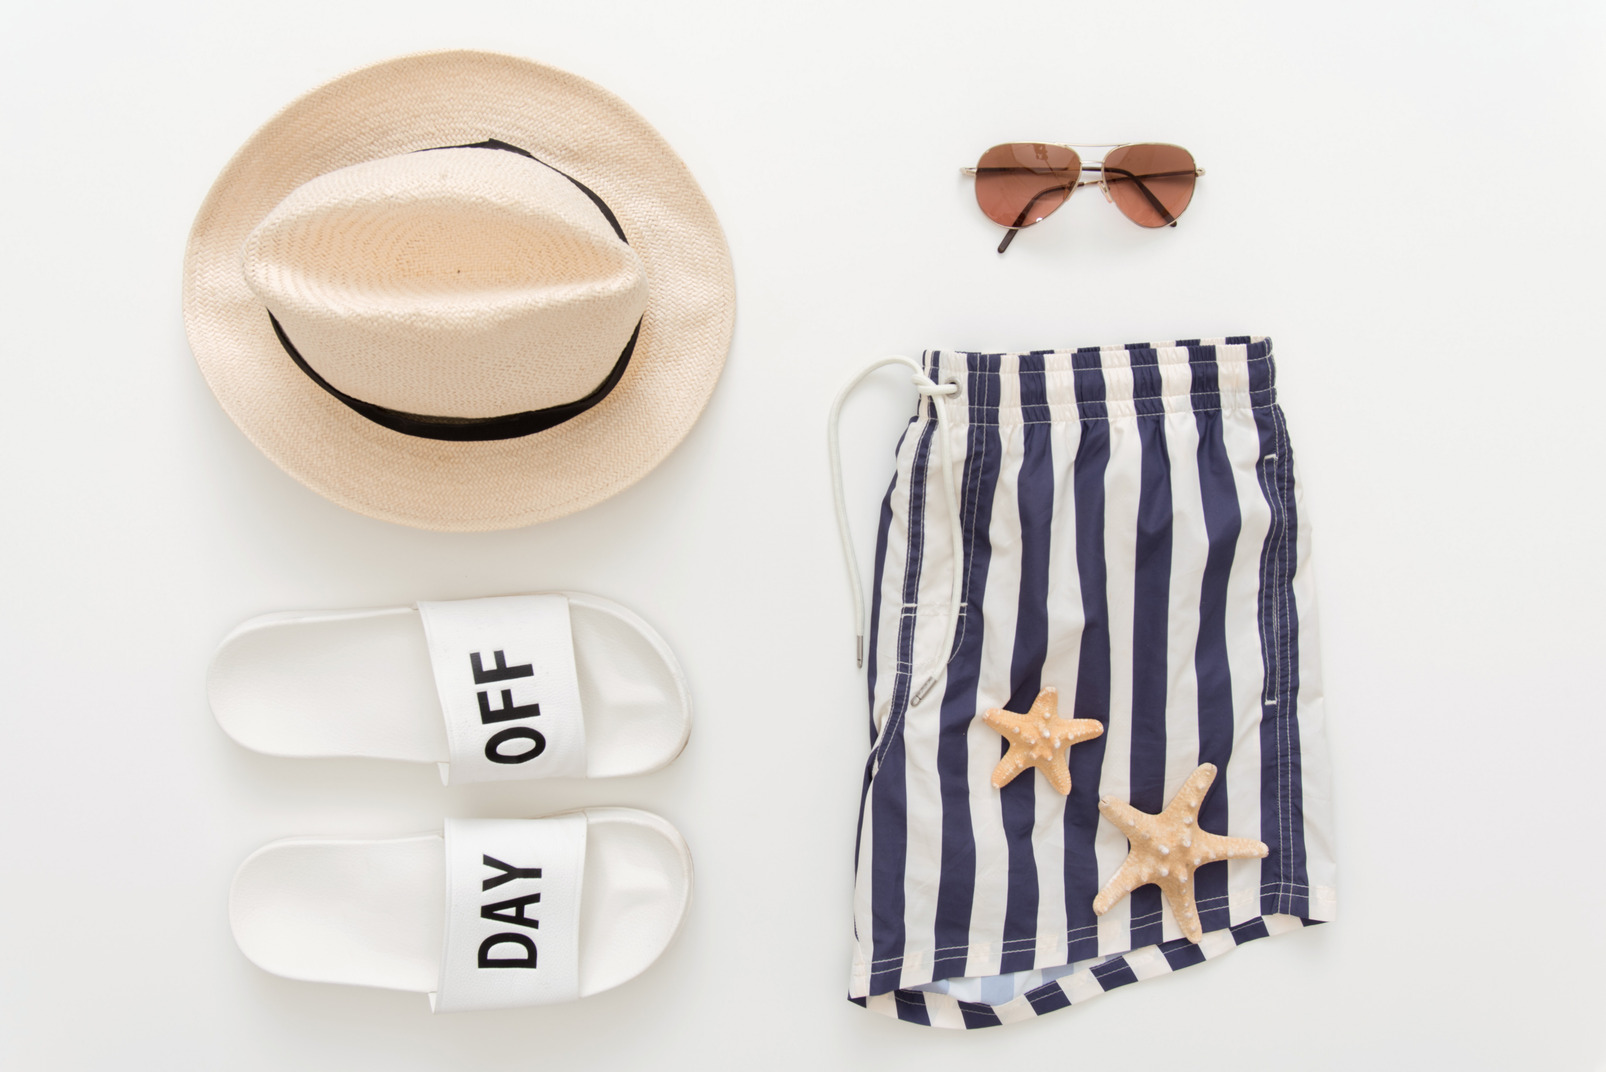 Striped man's bathing shorts, beach slippers, hat, sunglasses and sea shells